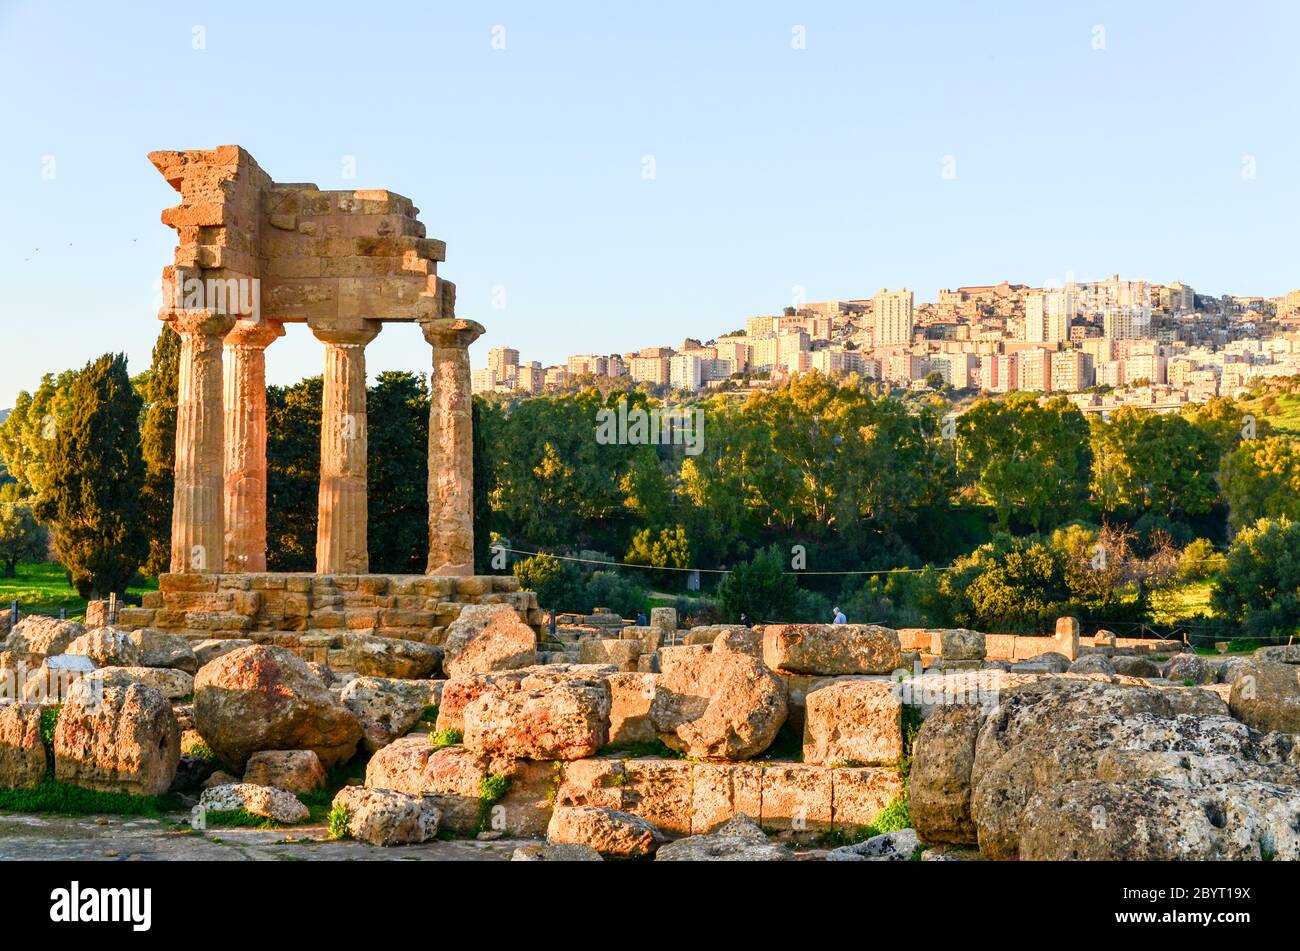 Ruins of the Temple of Castor and Pollux, Sicily, Italy Stock Photo